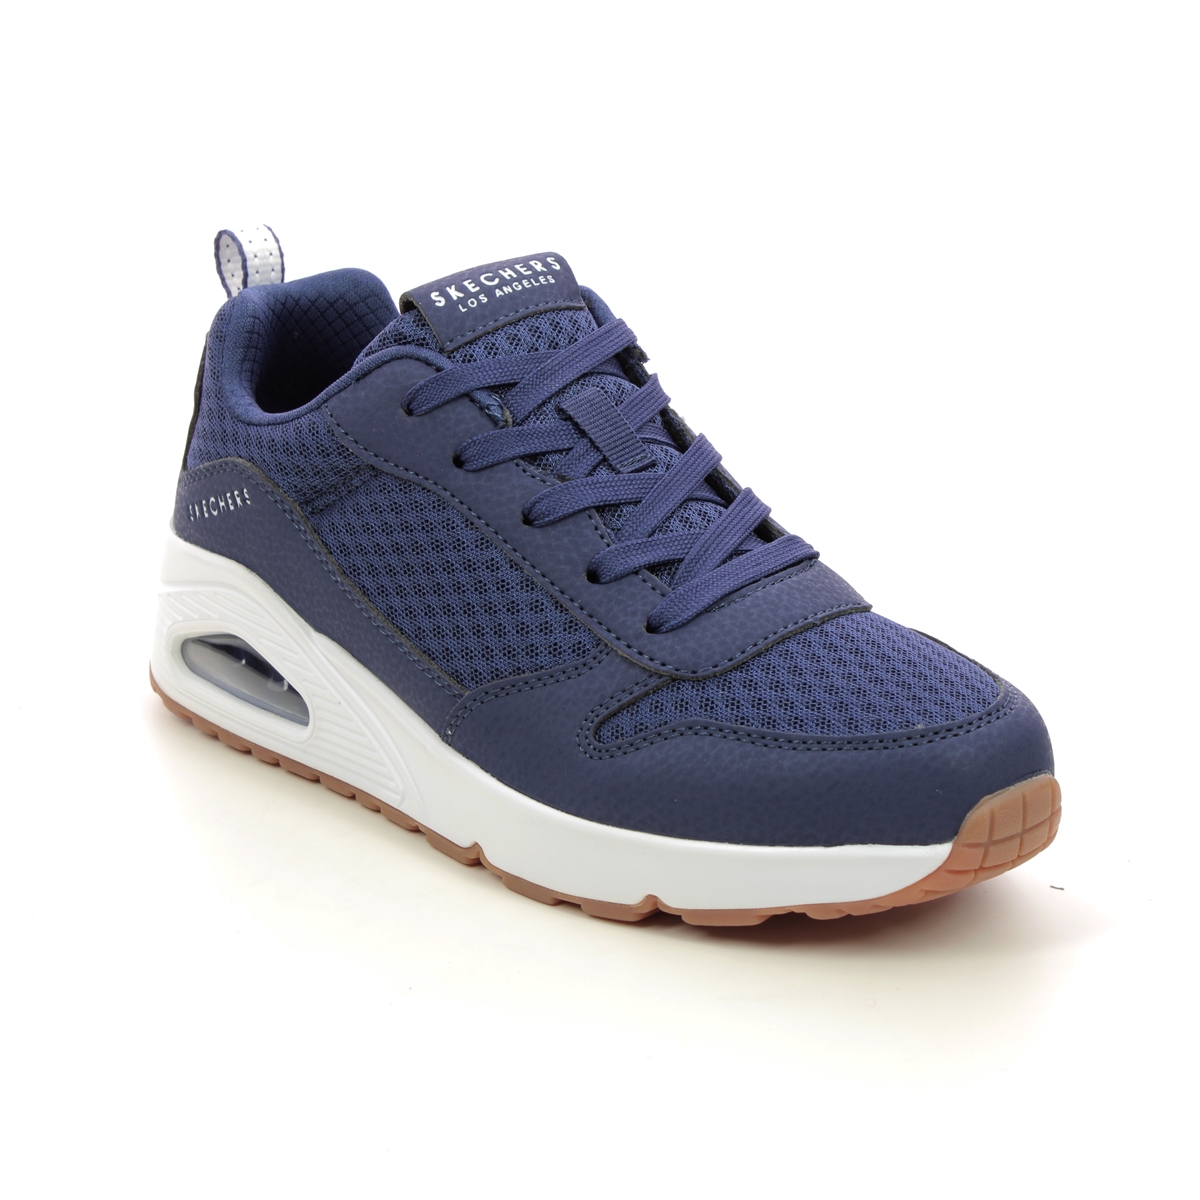 Skechers Uno Lite Lace Navy Kids Trainers 403667L In Size 34 In Plain Navy For kids